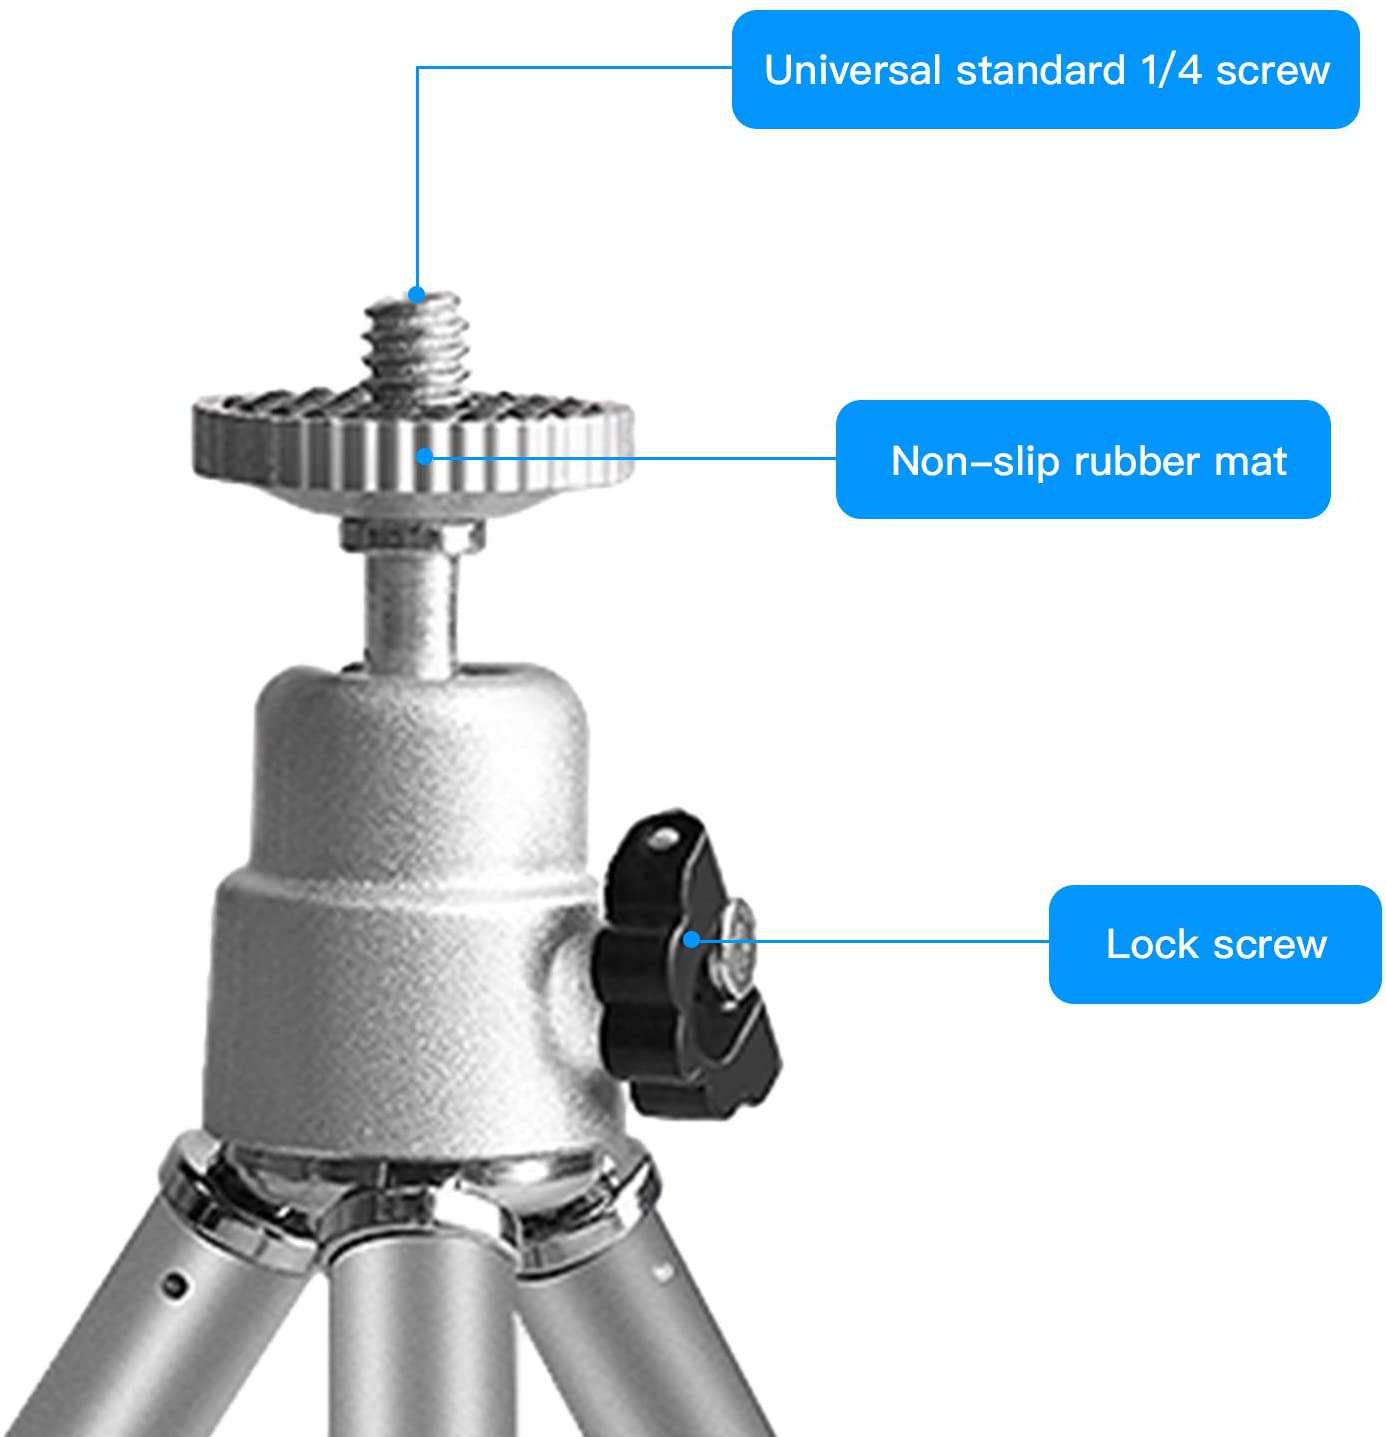 Universal tripod with 1/4 screw and secure screw lock for stability.